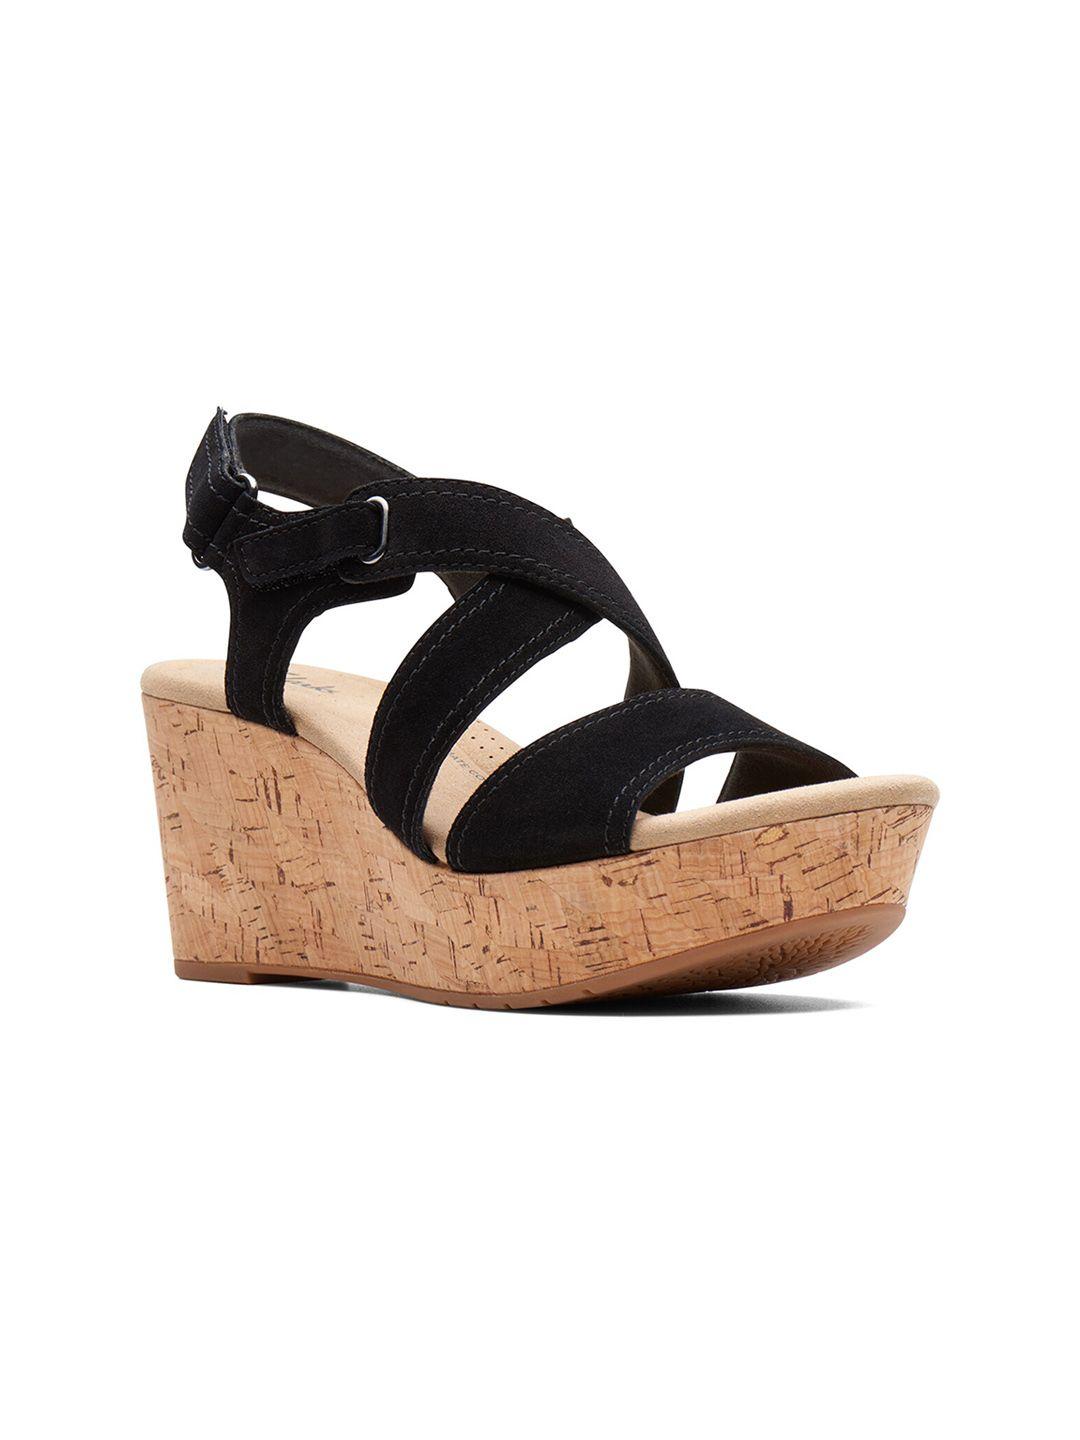 clarks suede wedges with buckles